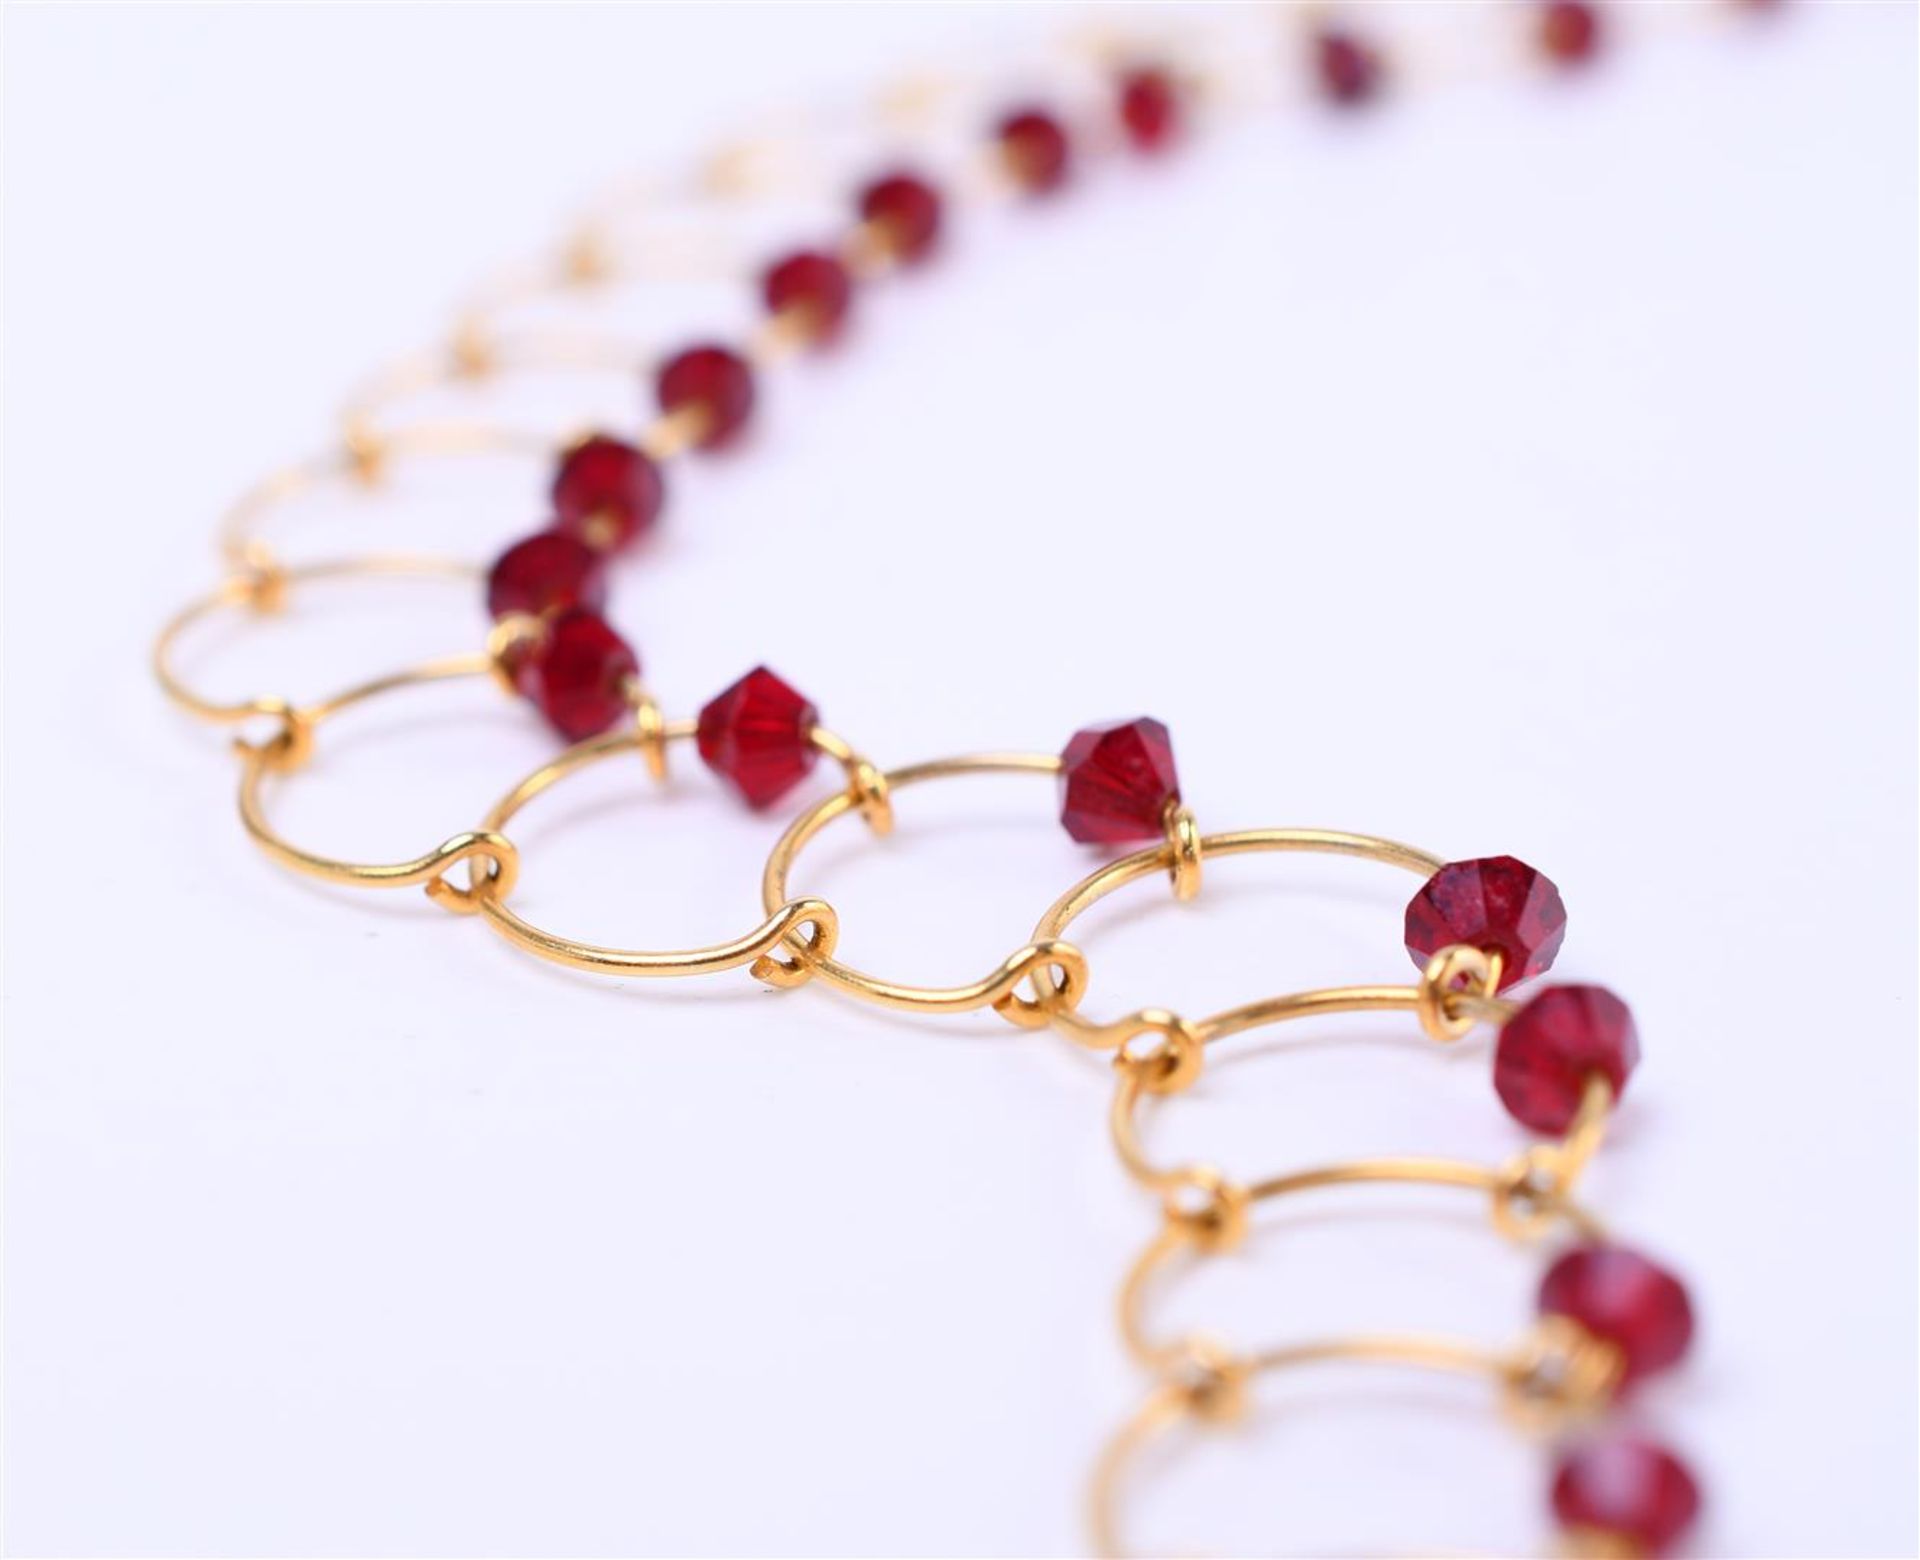 14 kt yellow gold wire necklace set with red crystal stones. Necklace length 41cm - Bild 4 aus 6